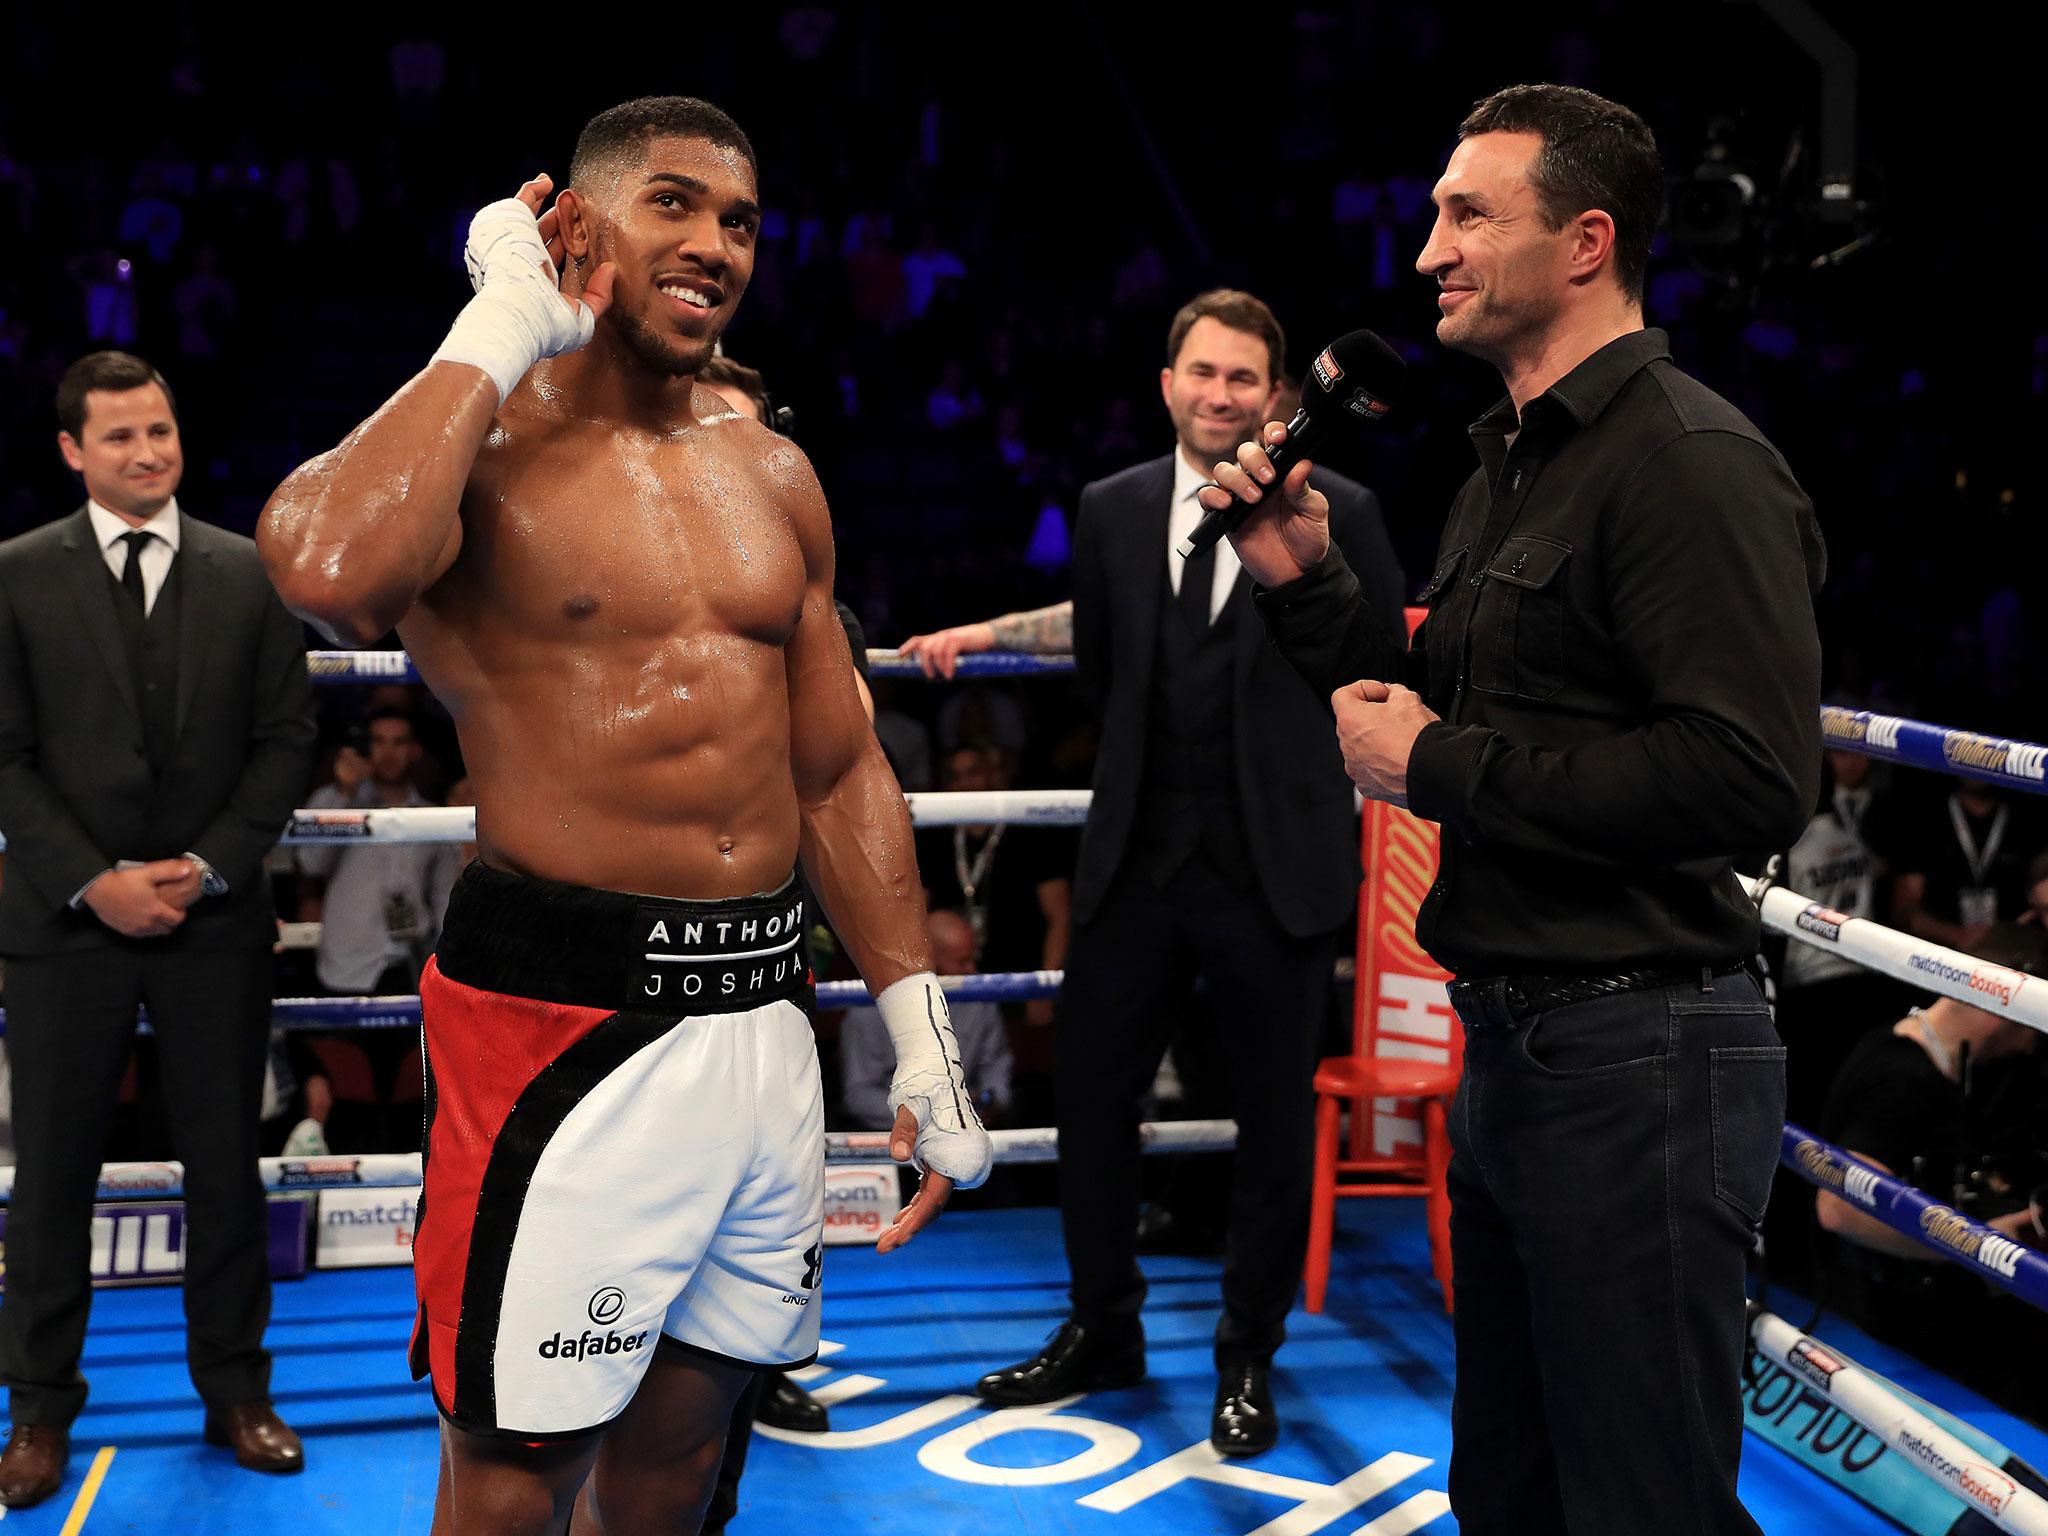 Anthony Joshua and Wladimir Klitschko go toe-to-toe in the ring next April in one of the most eagerly anticipated fights of the decade if not century